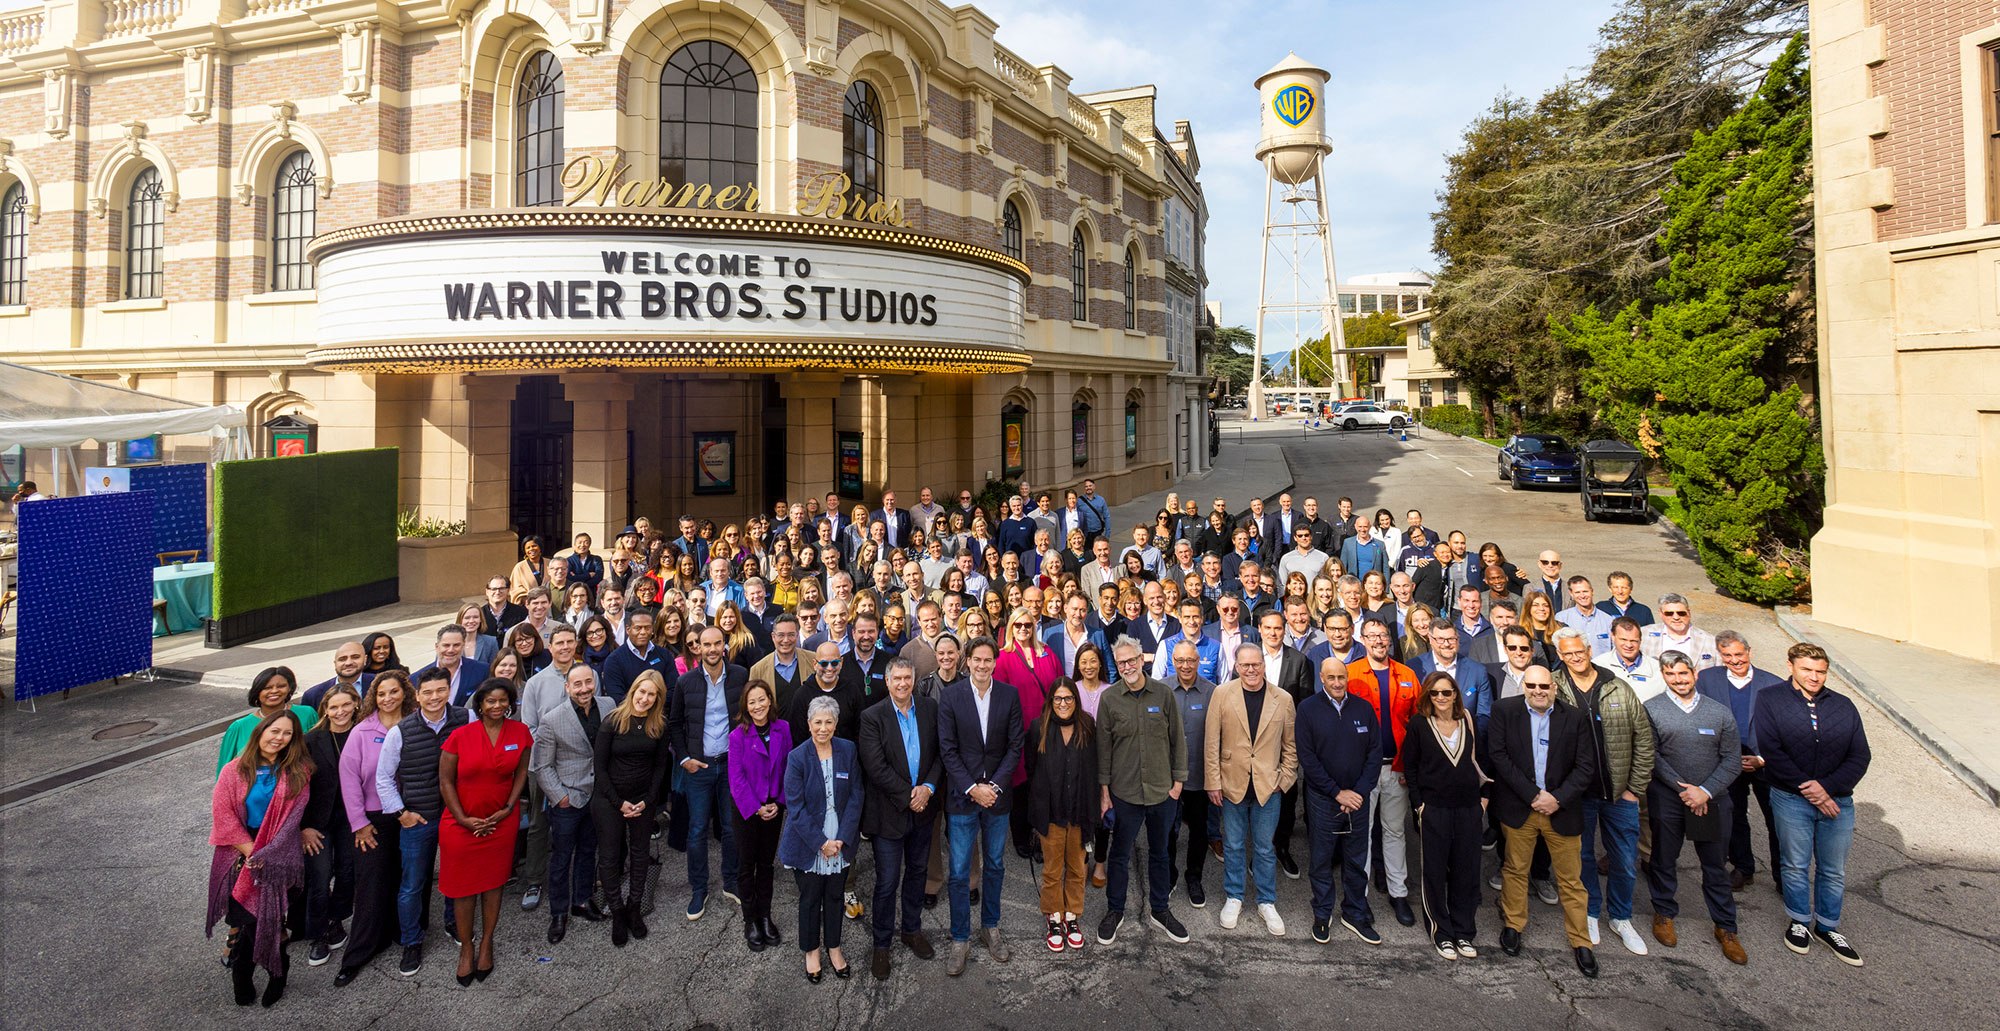 Photo of Warner Bros. Discovery's global senior leadership team gathered for a group photo on Warner Bros. Studios lot